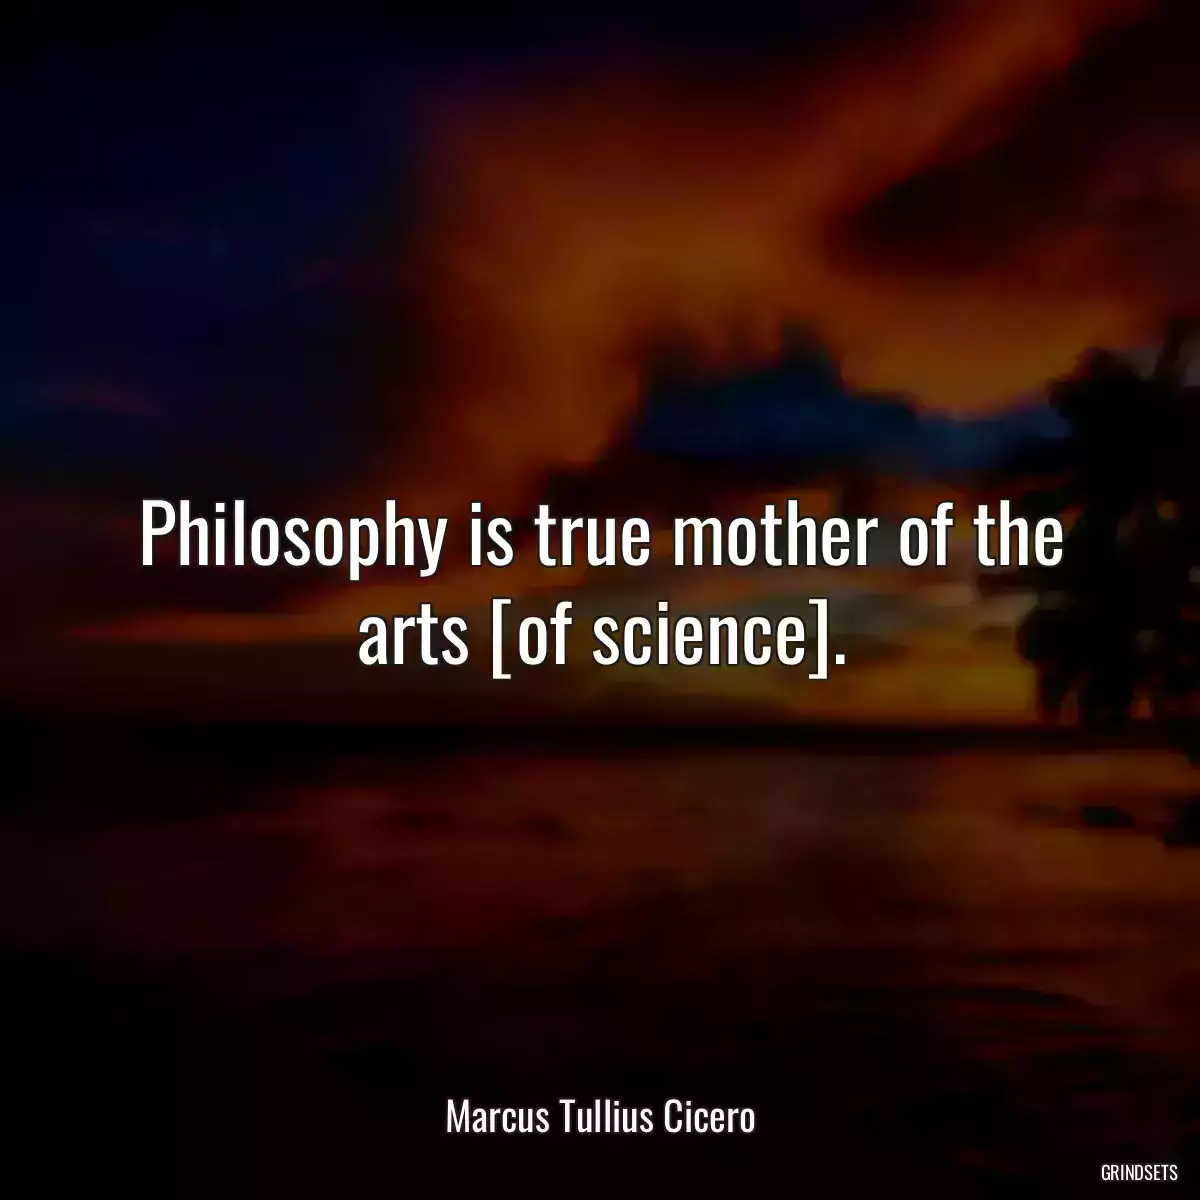 Philosophy is true mother of the arts [of science].